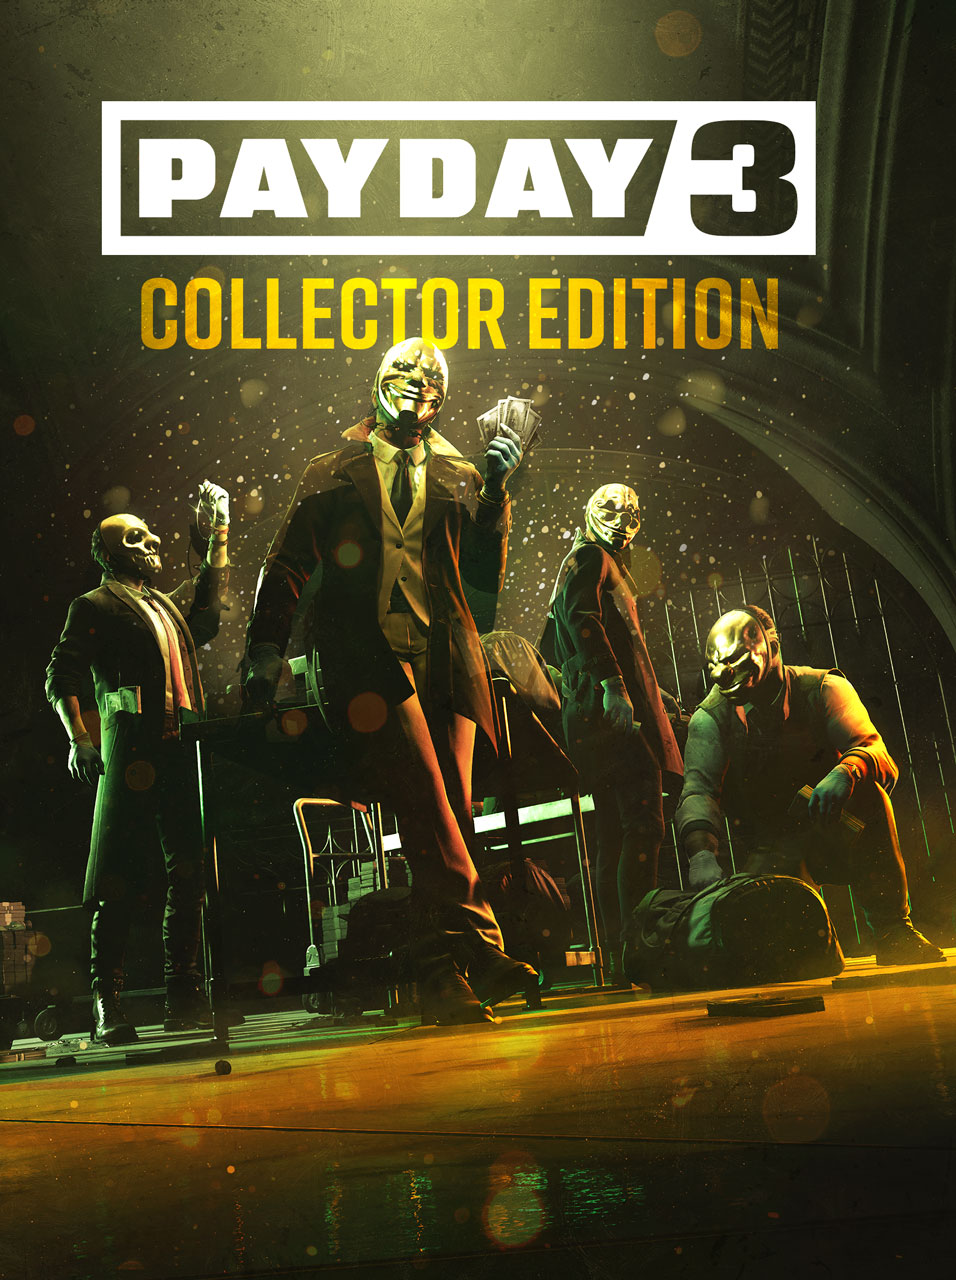 Apparently Payday 3 won't allow you to play without internet connection :  r/paydaytheheist